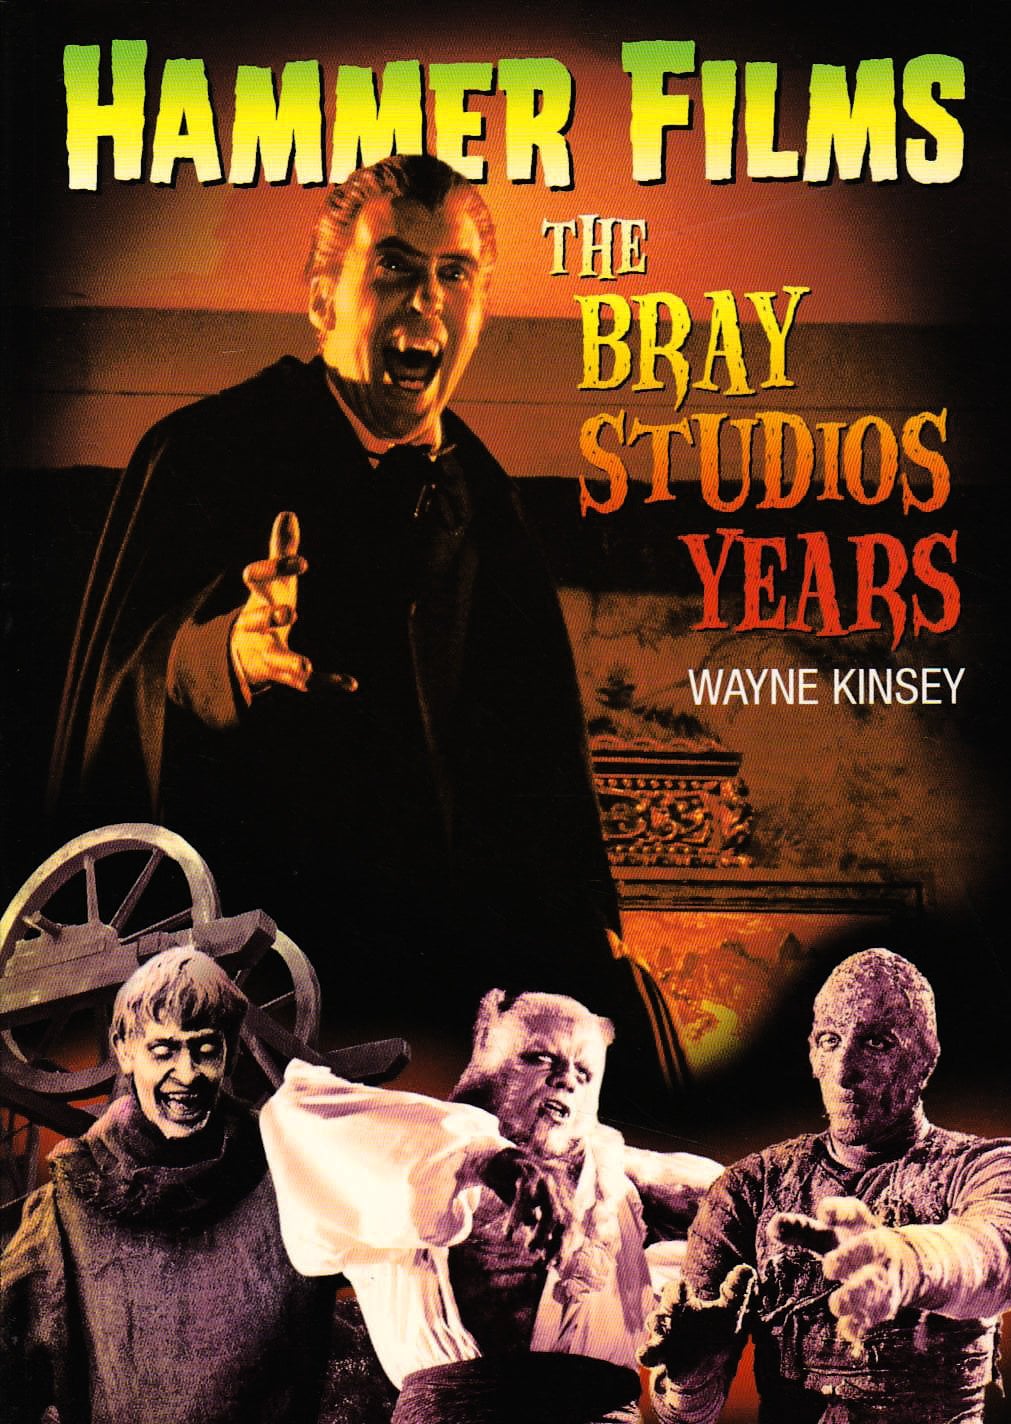 Hammer Films: The Bray Studio Years book cover